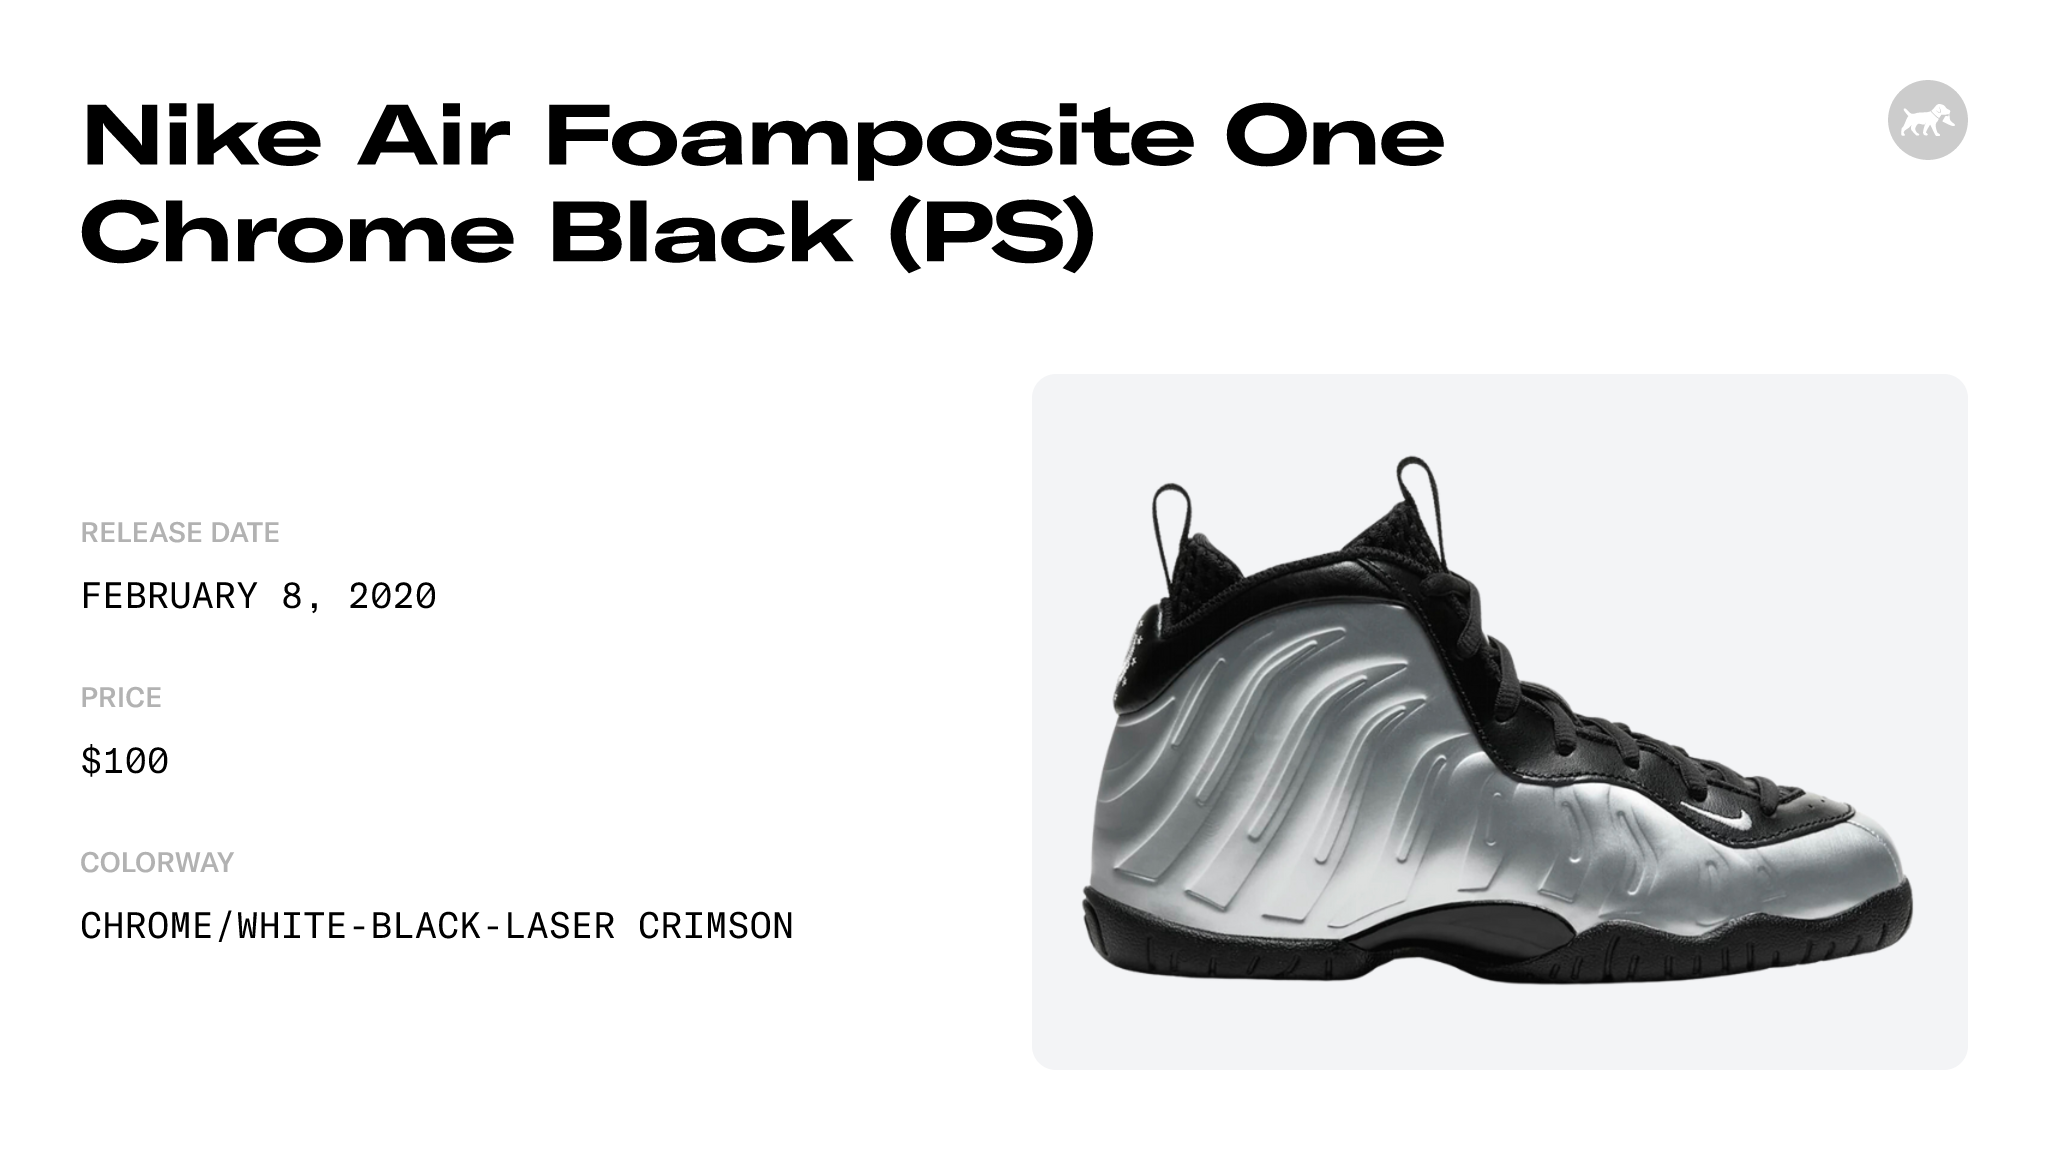 Nike Air Foamposite One Chrome Black (PS) Raffles and Release Date ...